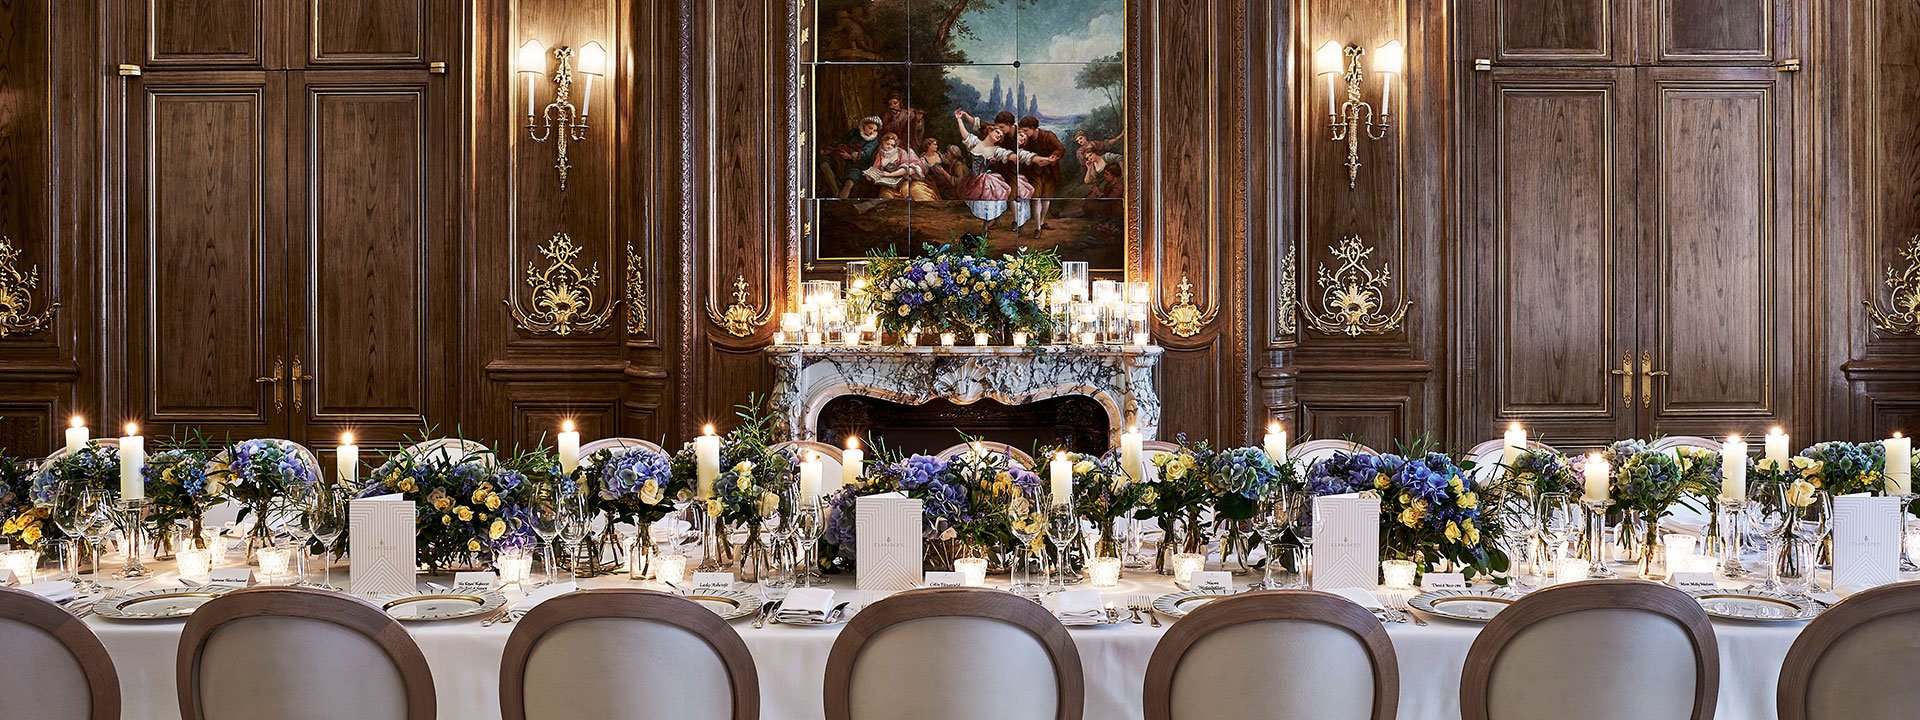 A view of the French Salon transformed for wedding purposes, romantically decorated with flowers and candles.